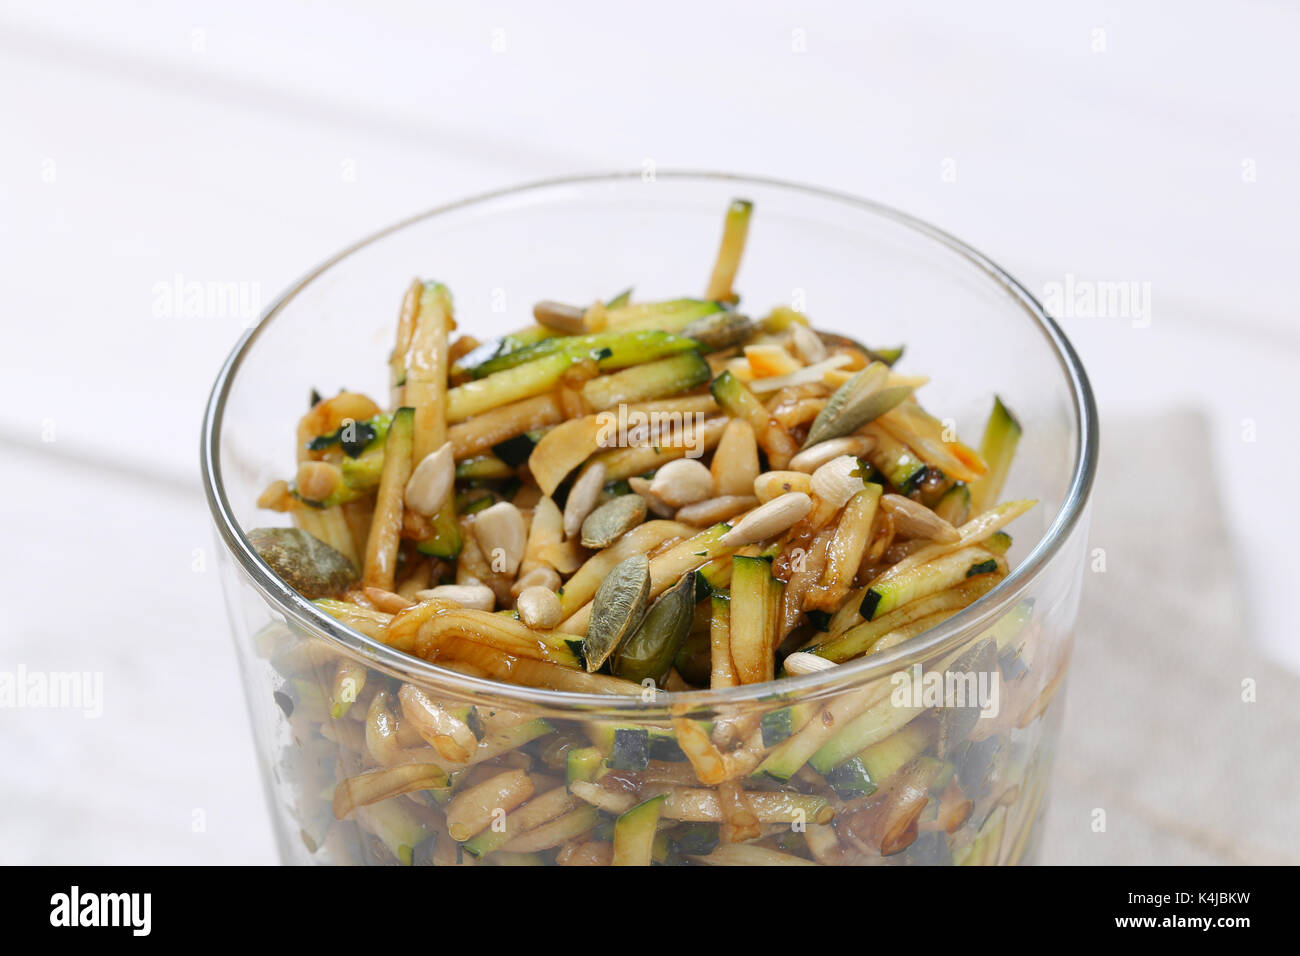 Zucchini salad with pumpkin seeds, sunflower seeds and pine nuts Stock Photo